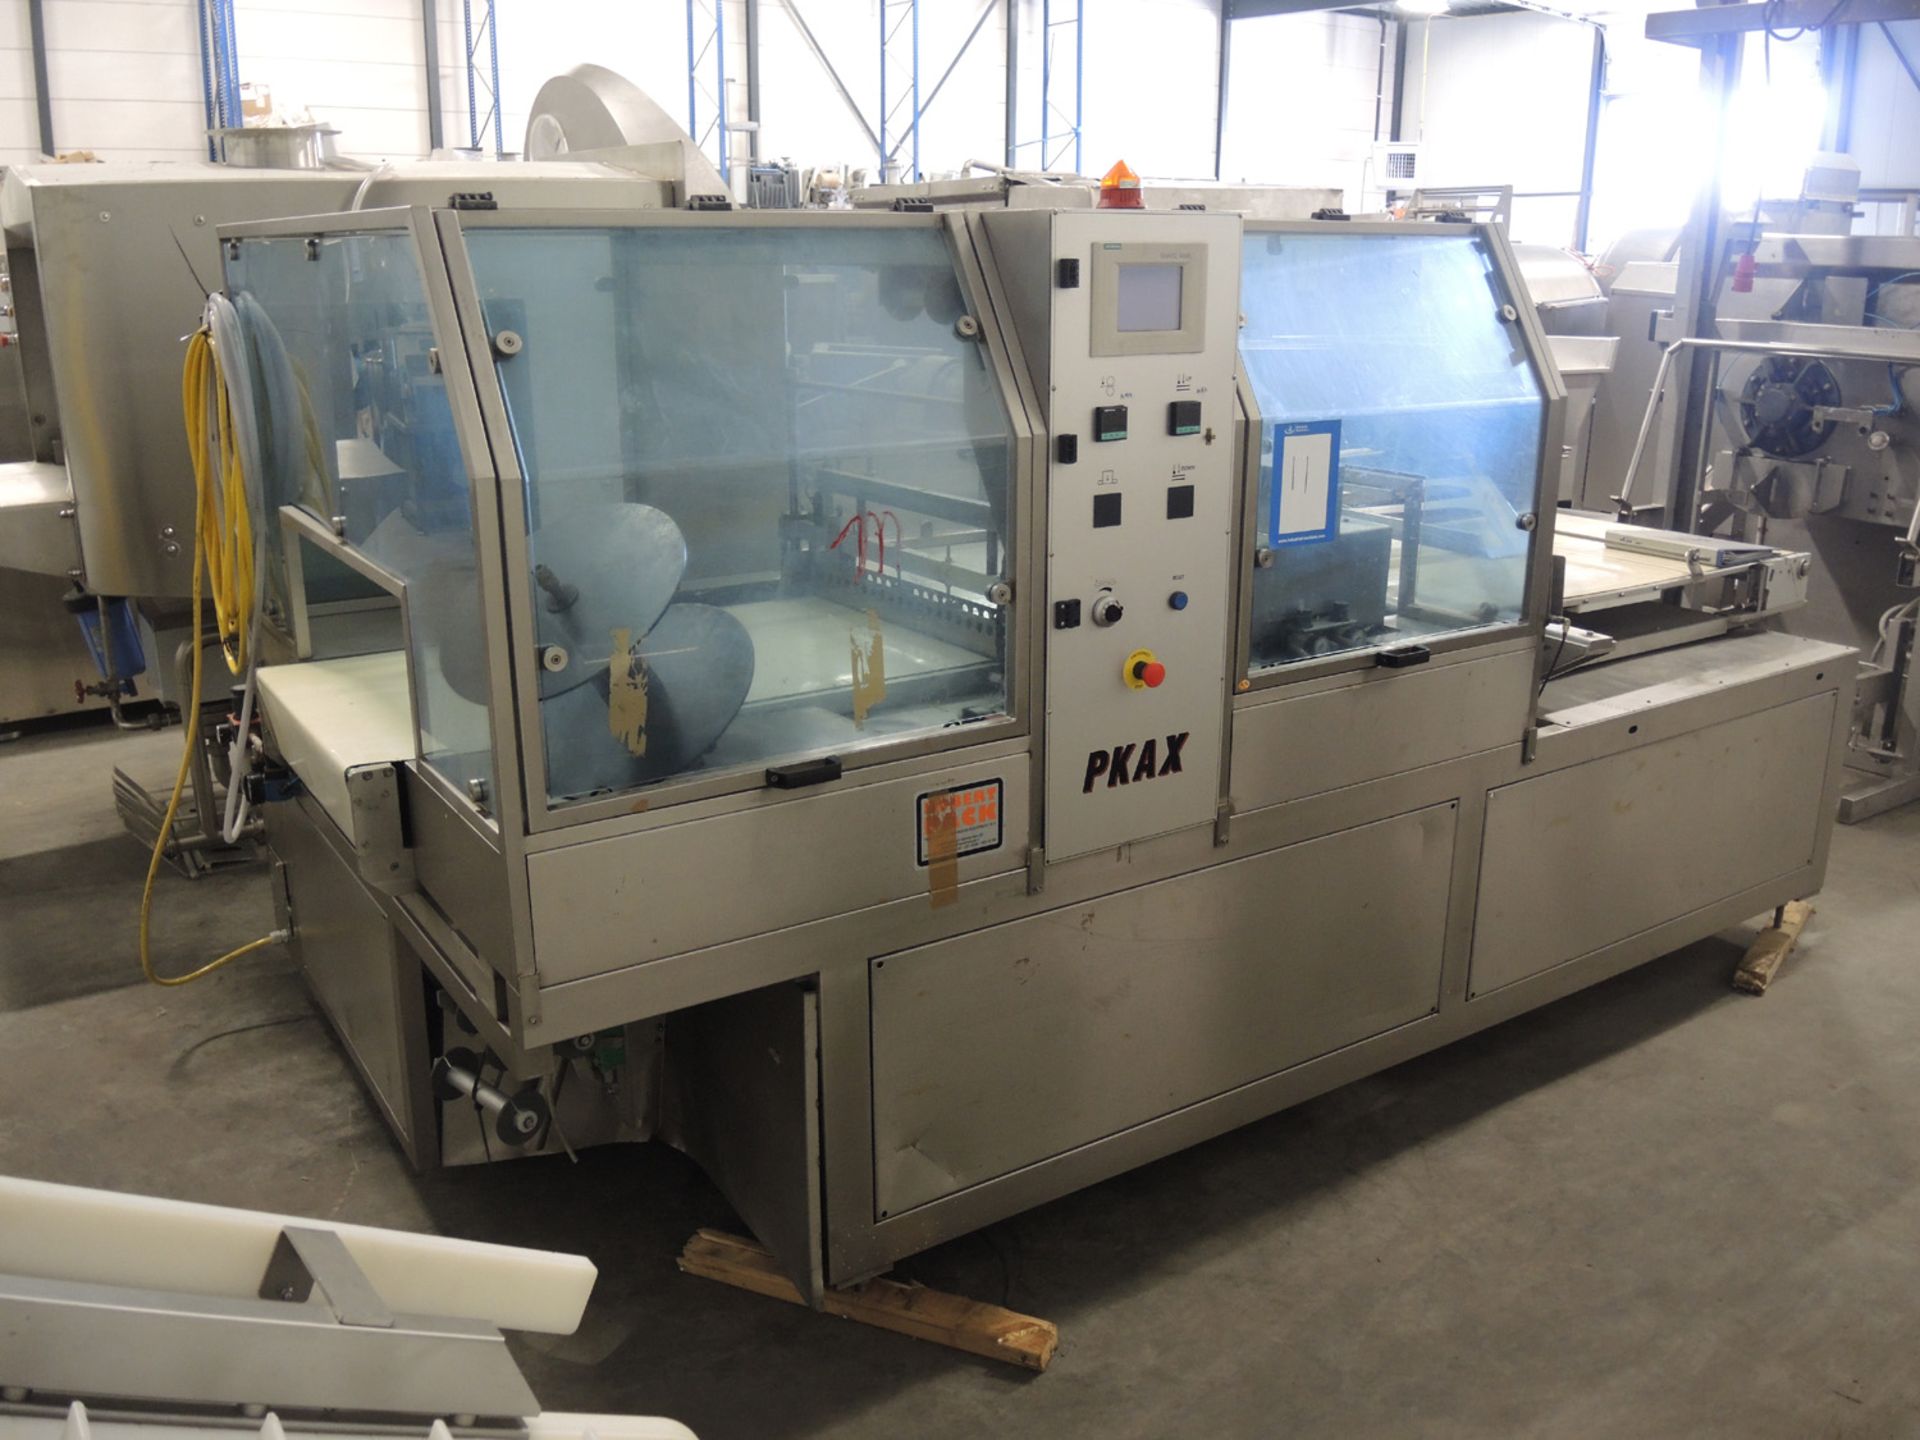 Italferpack automatic wrapping machine, model: PKAX box motion, serial number: 1732.03, year of